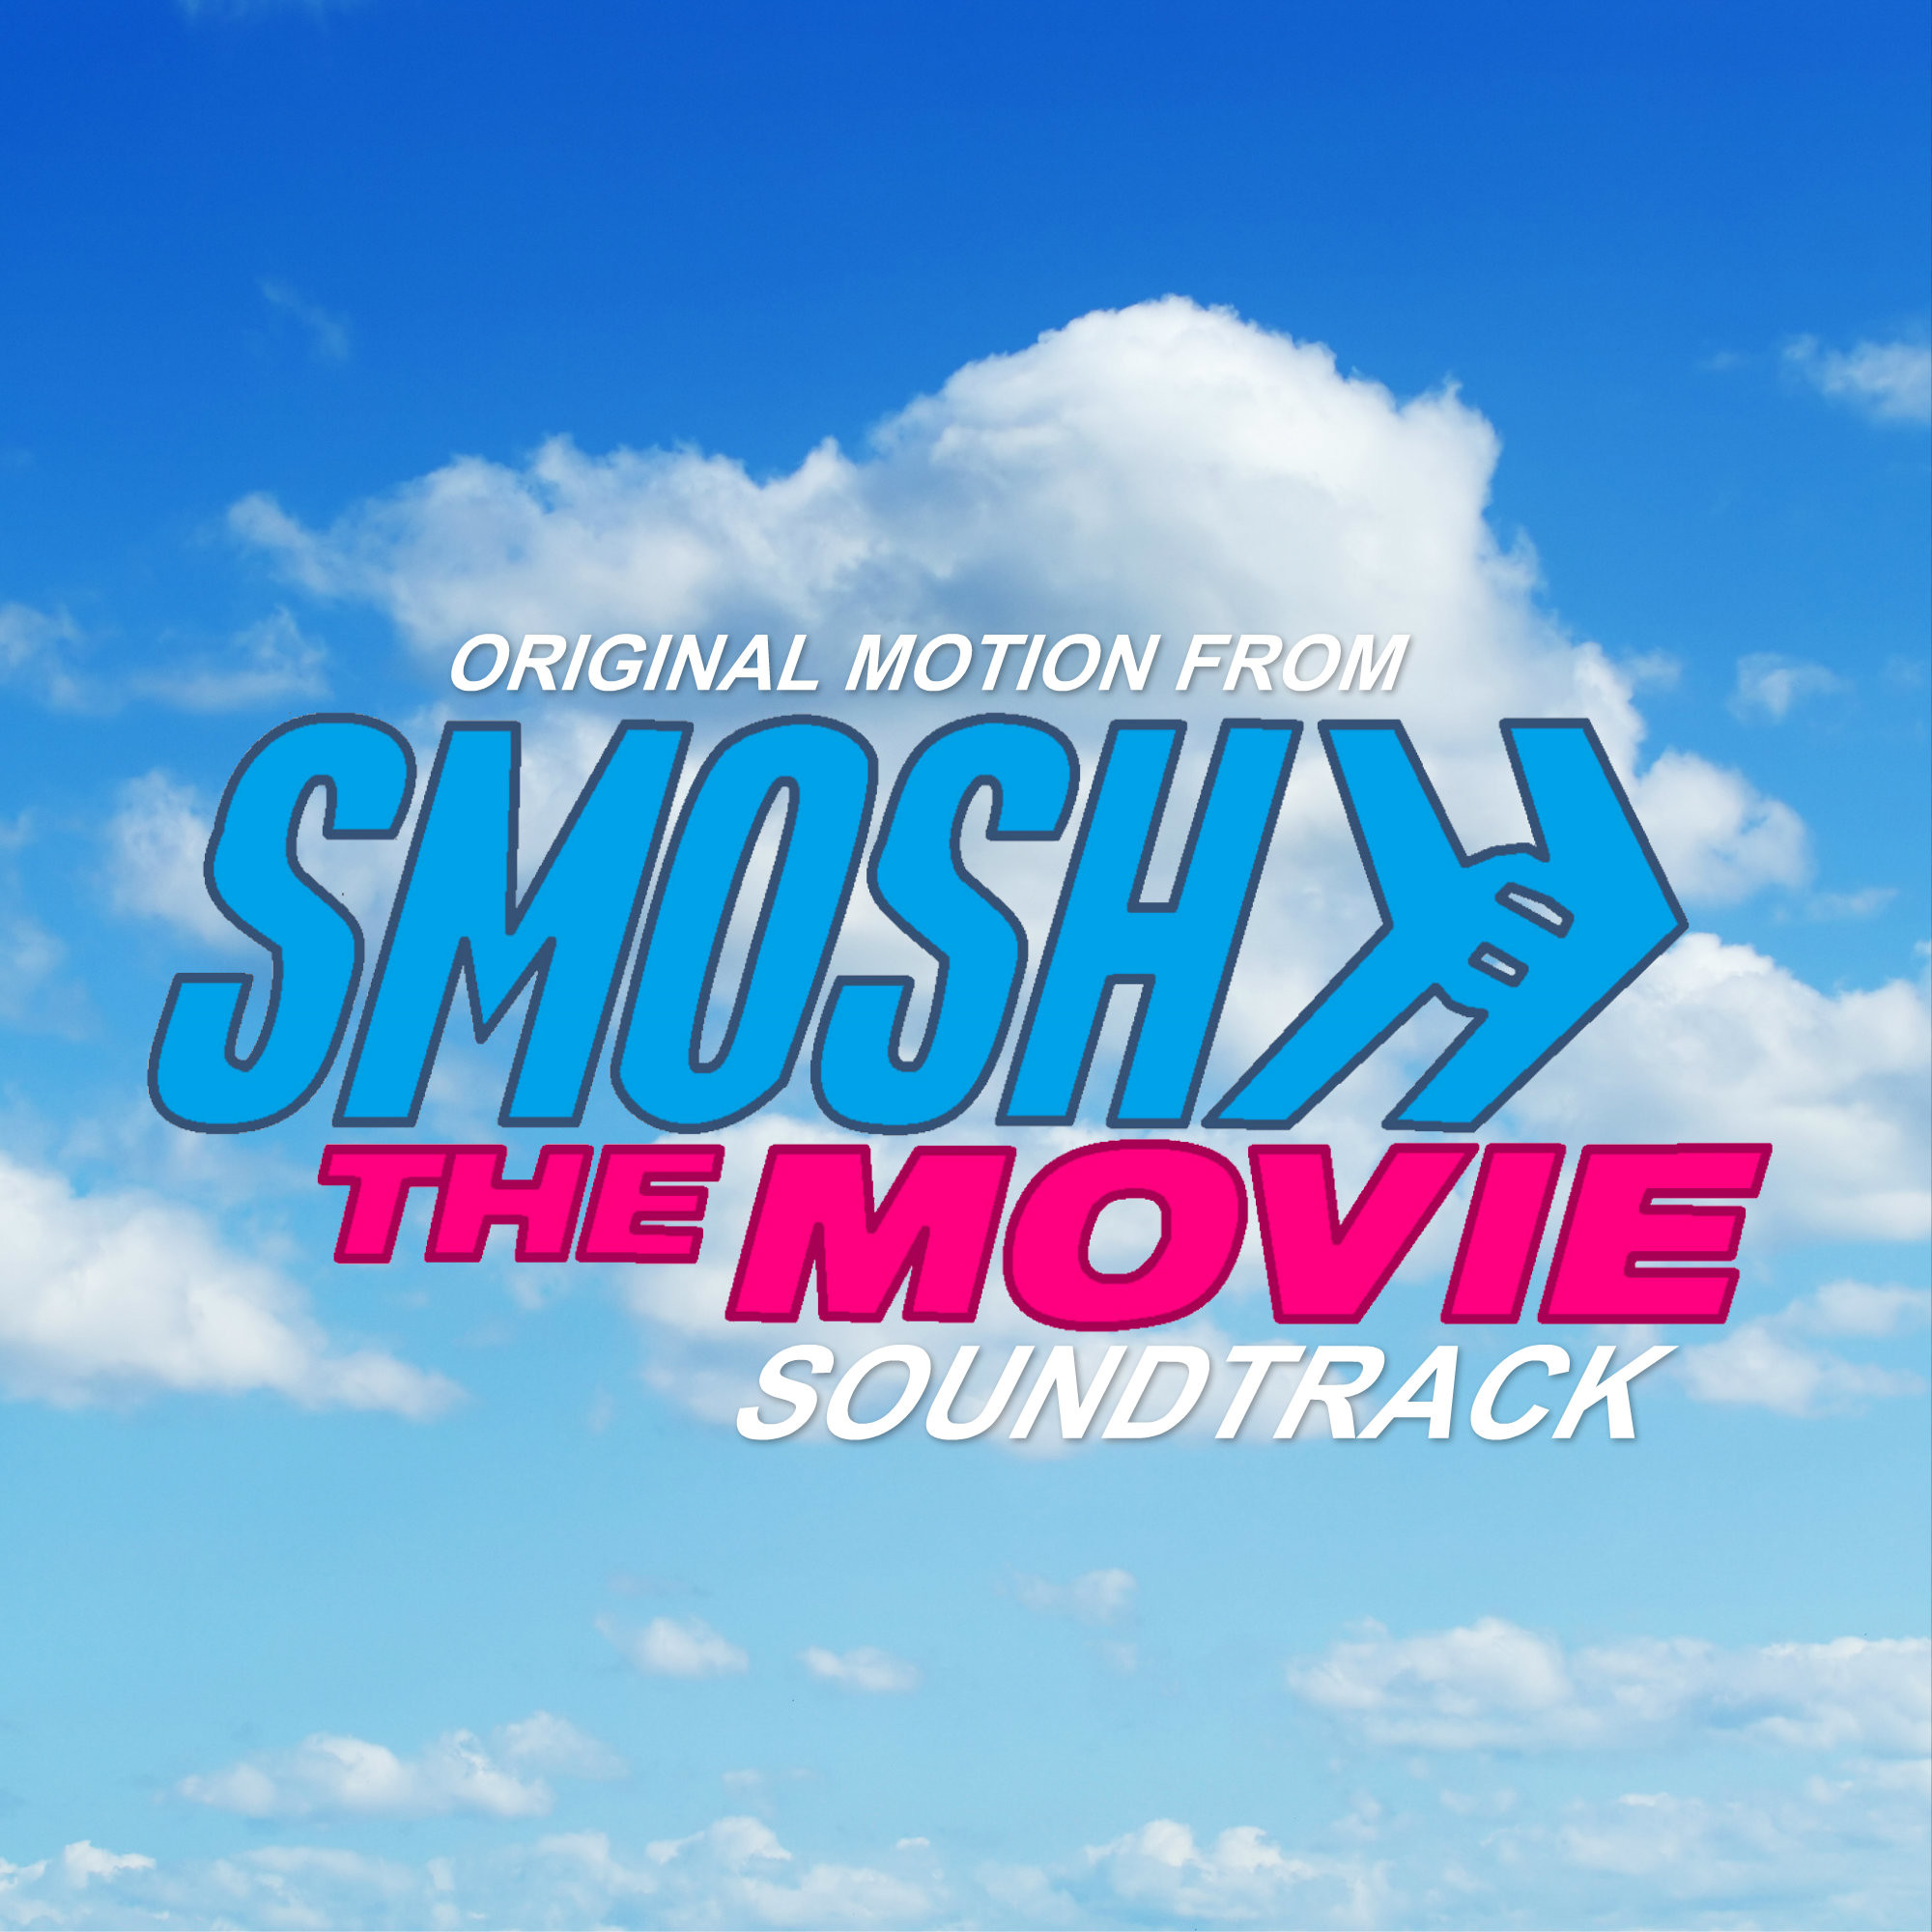 2000x2000 titas images Original Motion From (Smosh The Movie Soundtrack) HD wallpaper  and background photos